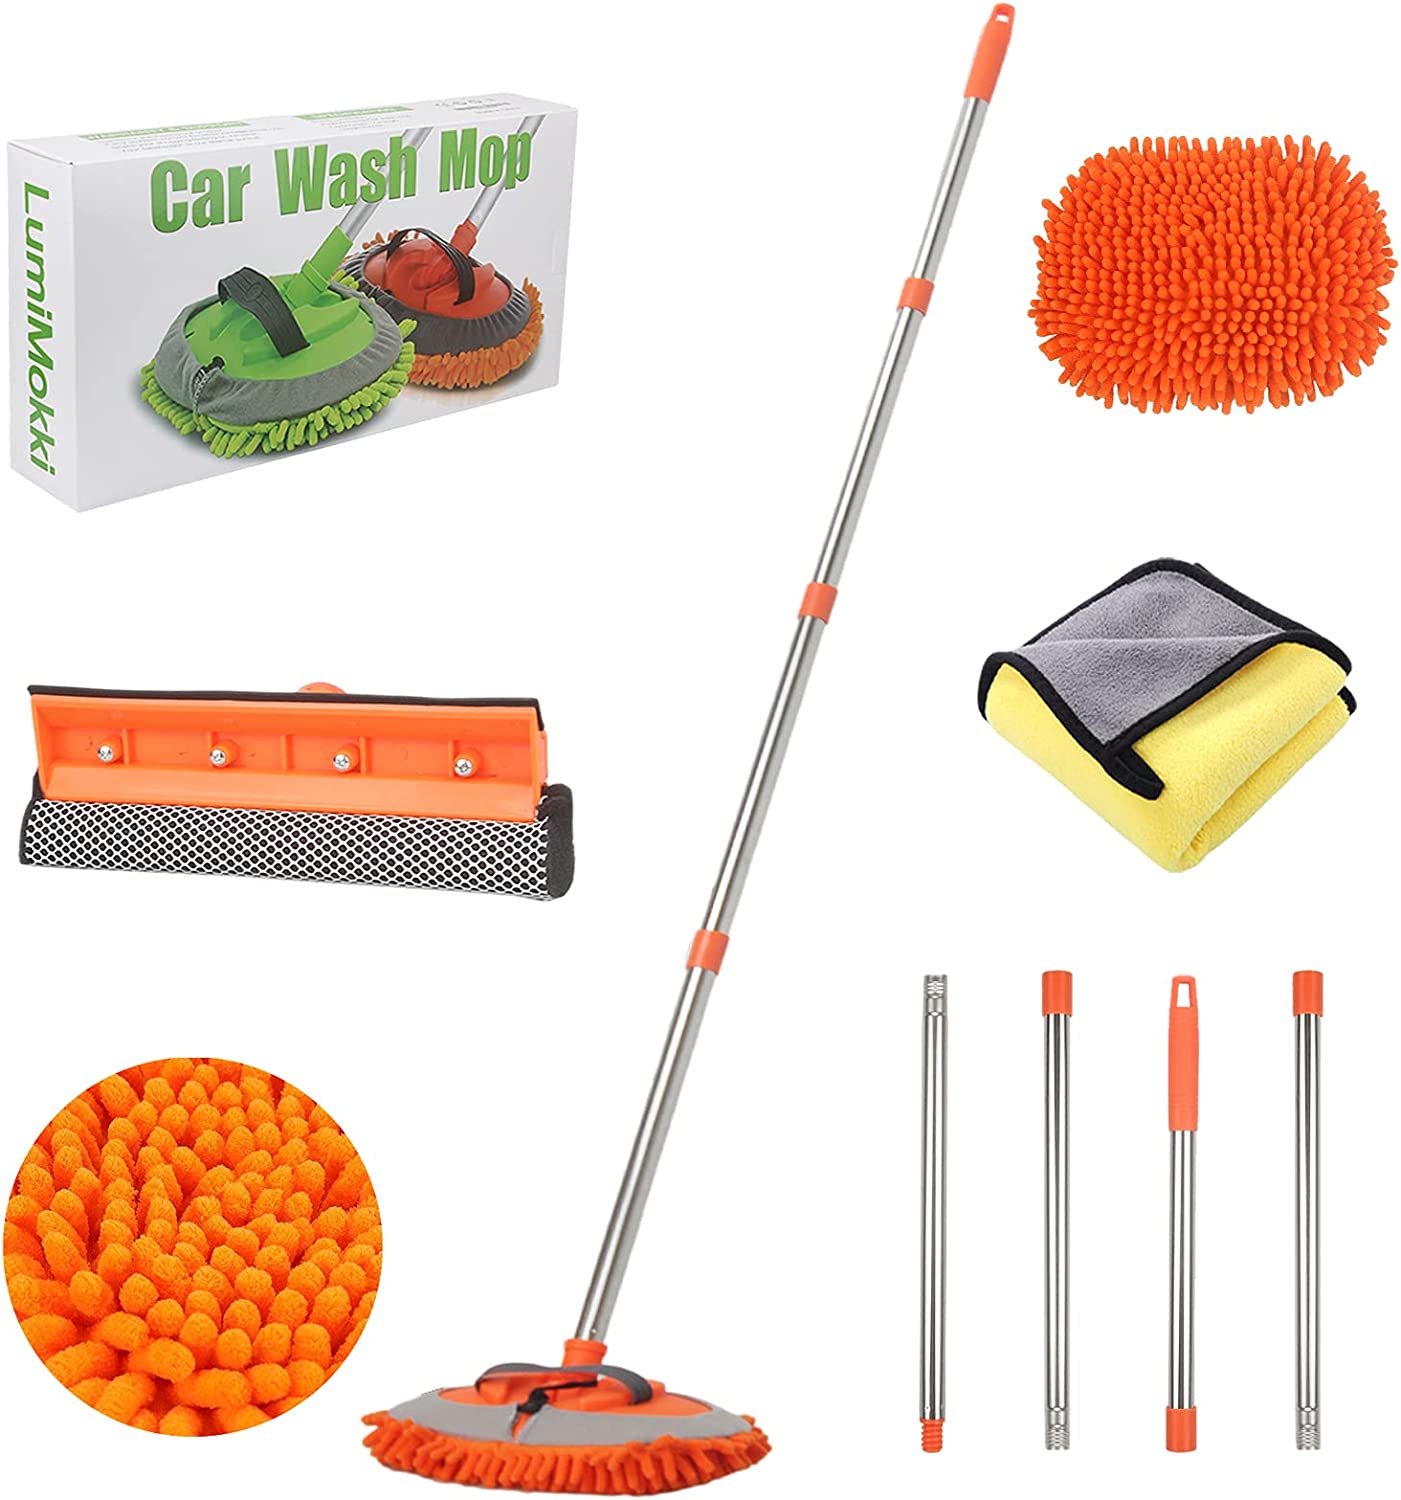 62" Car Wash Mop Kit, Car Wash Brush with Long Handle Stainless Steel Pole, Car Wash Kit Car Detailing Kit Car Wash Mop Mitt Car Cleaning Supplies Kit for RV Cars SUV Trucks and Bus (Green)